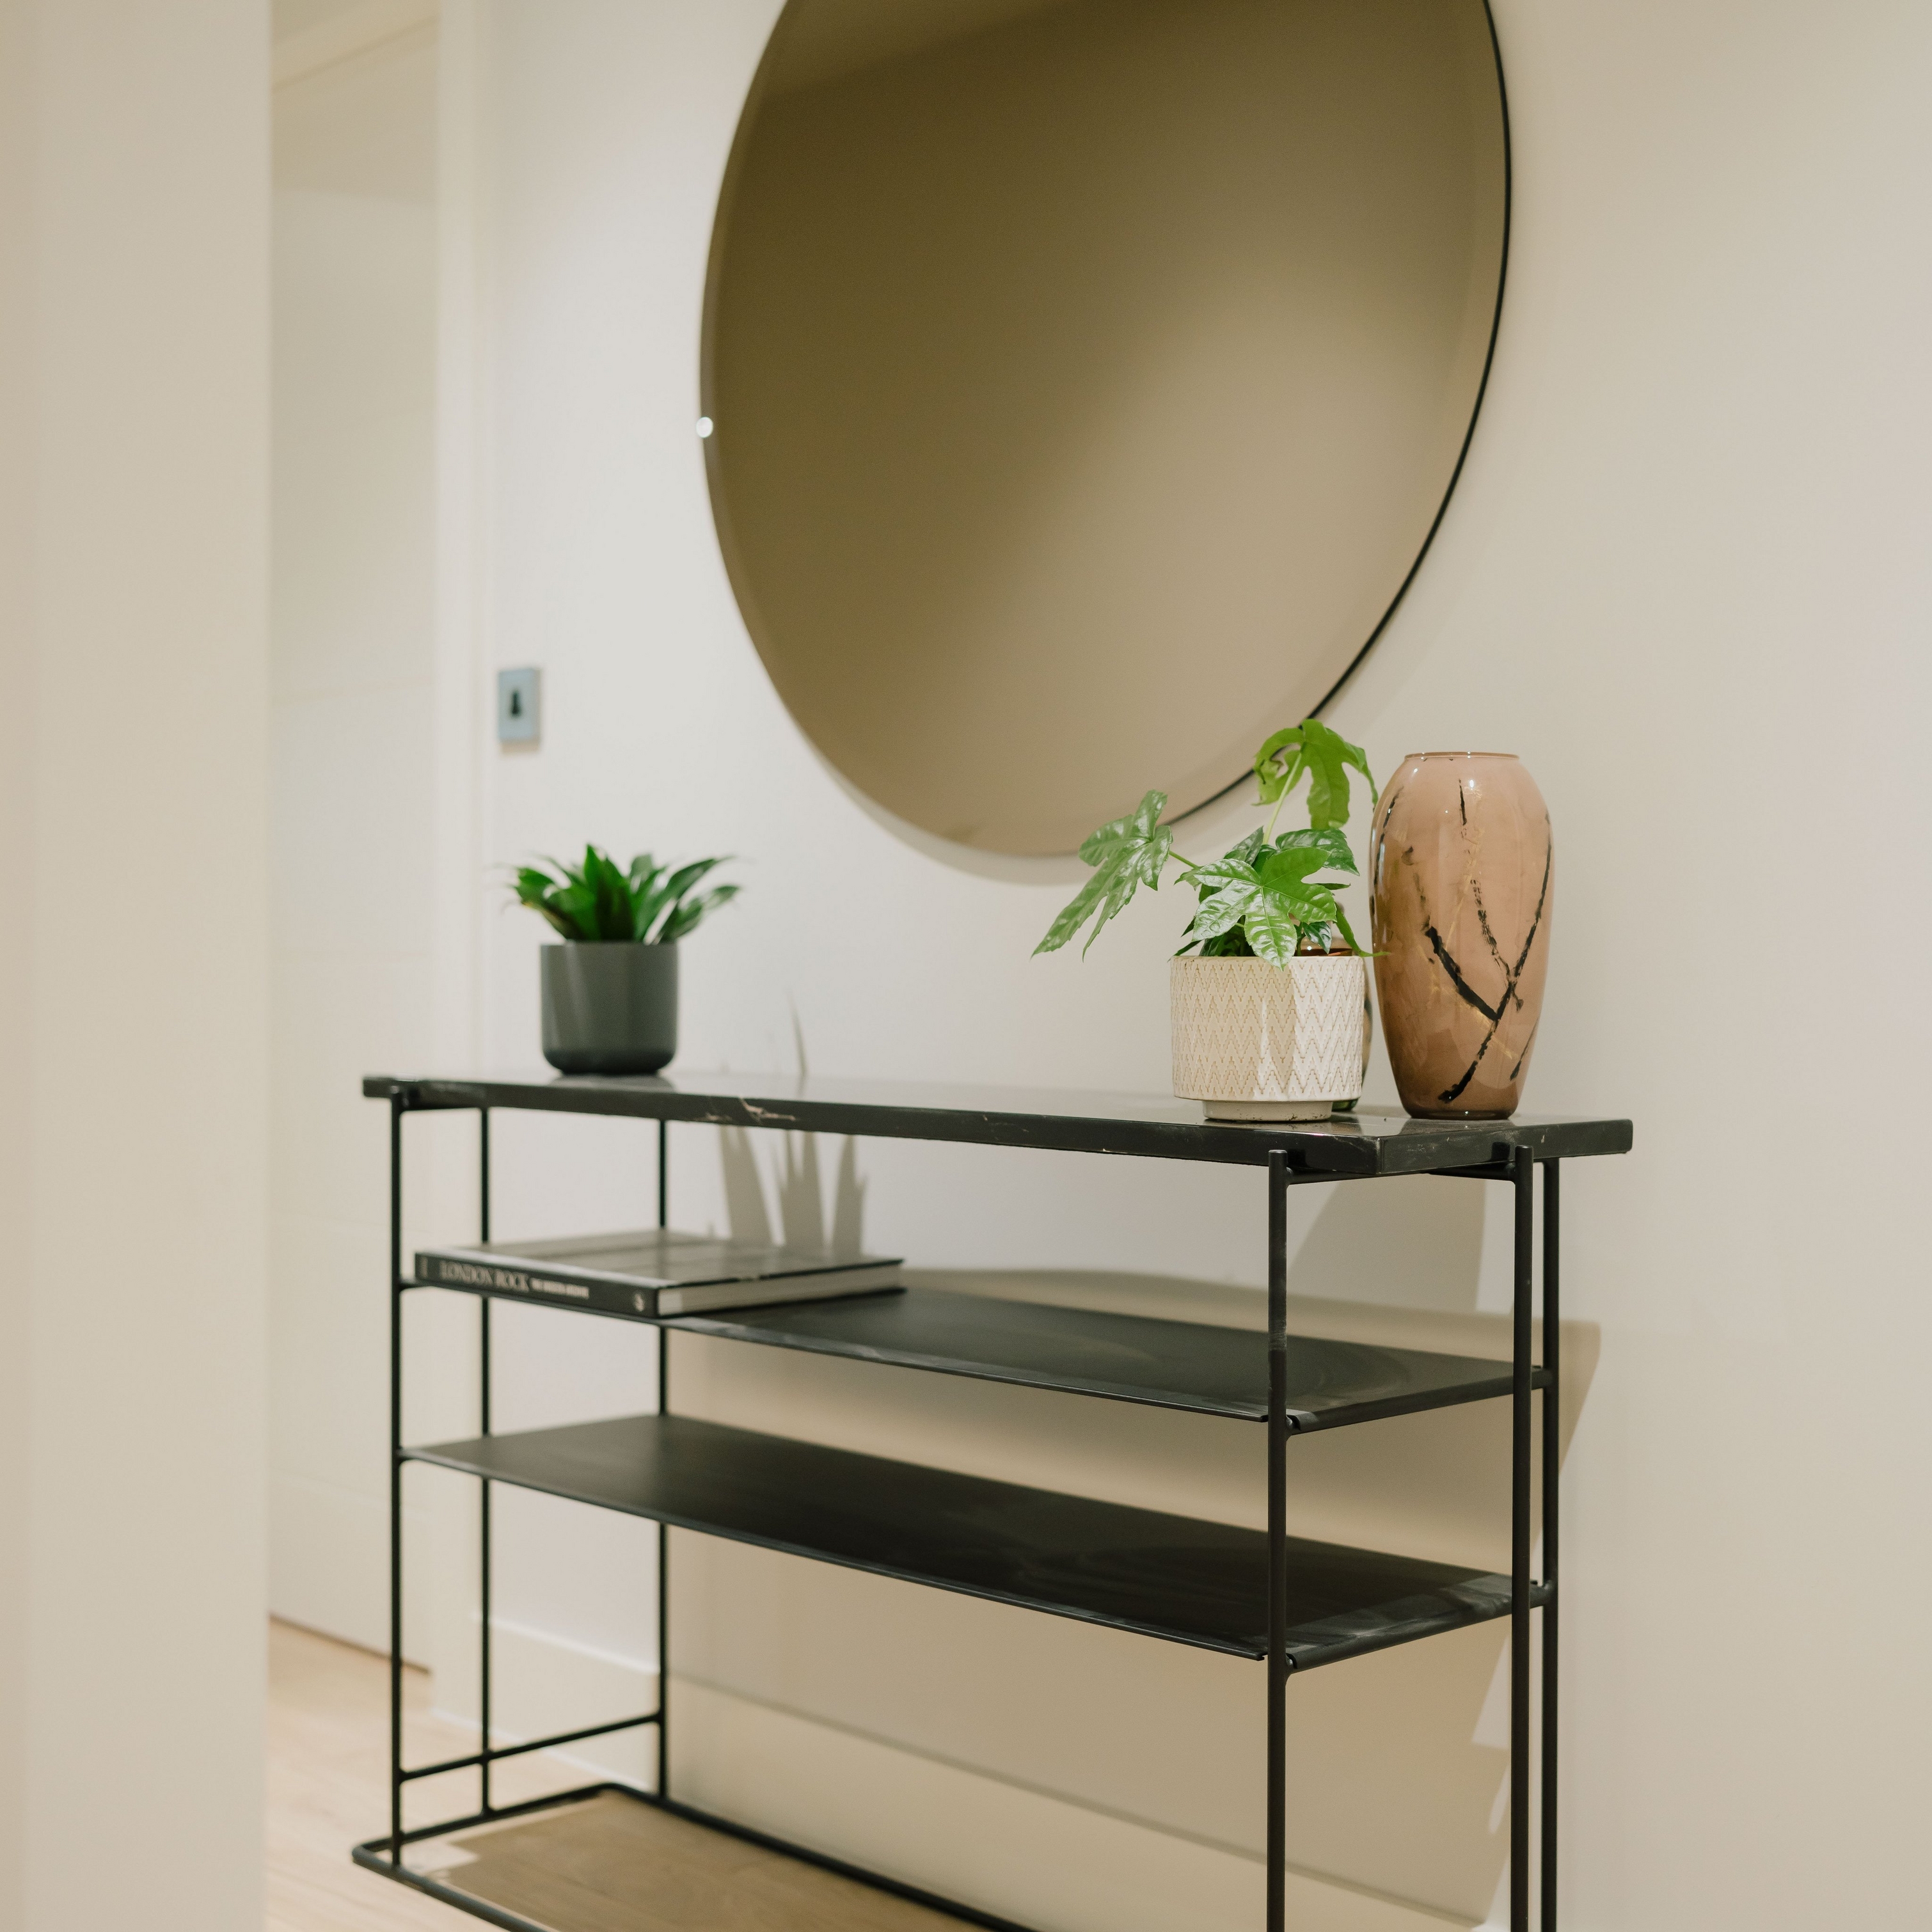 Minimalist console table with plants and vase under a large round mirror.